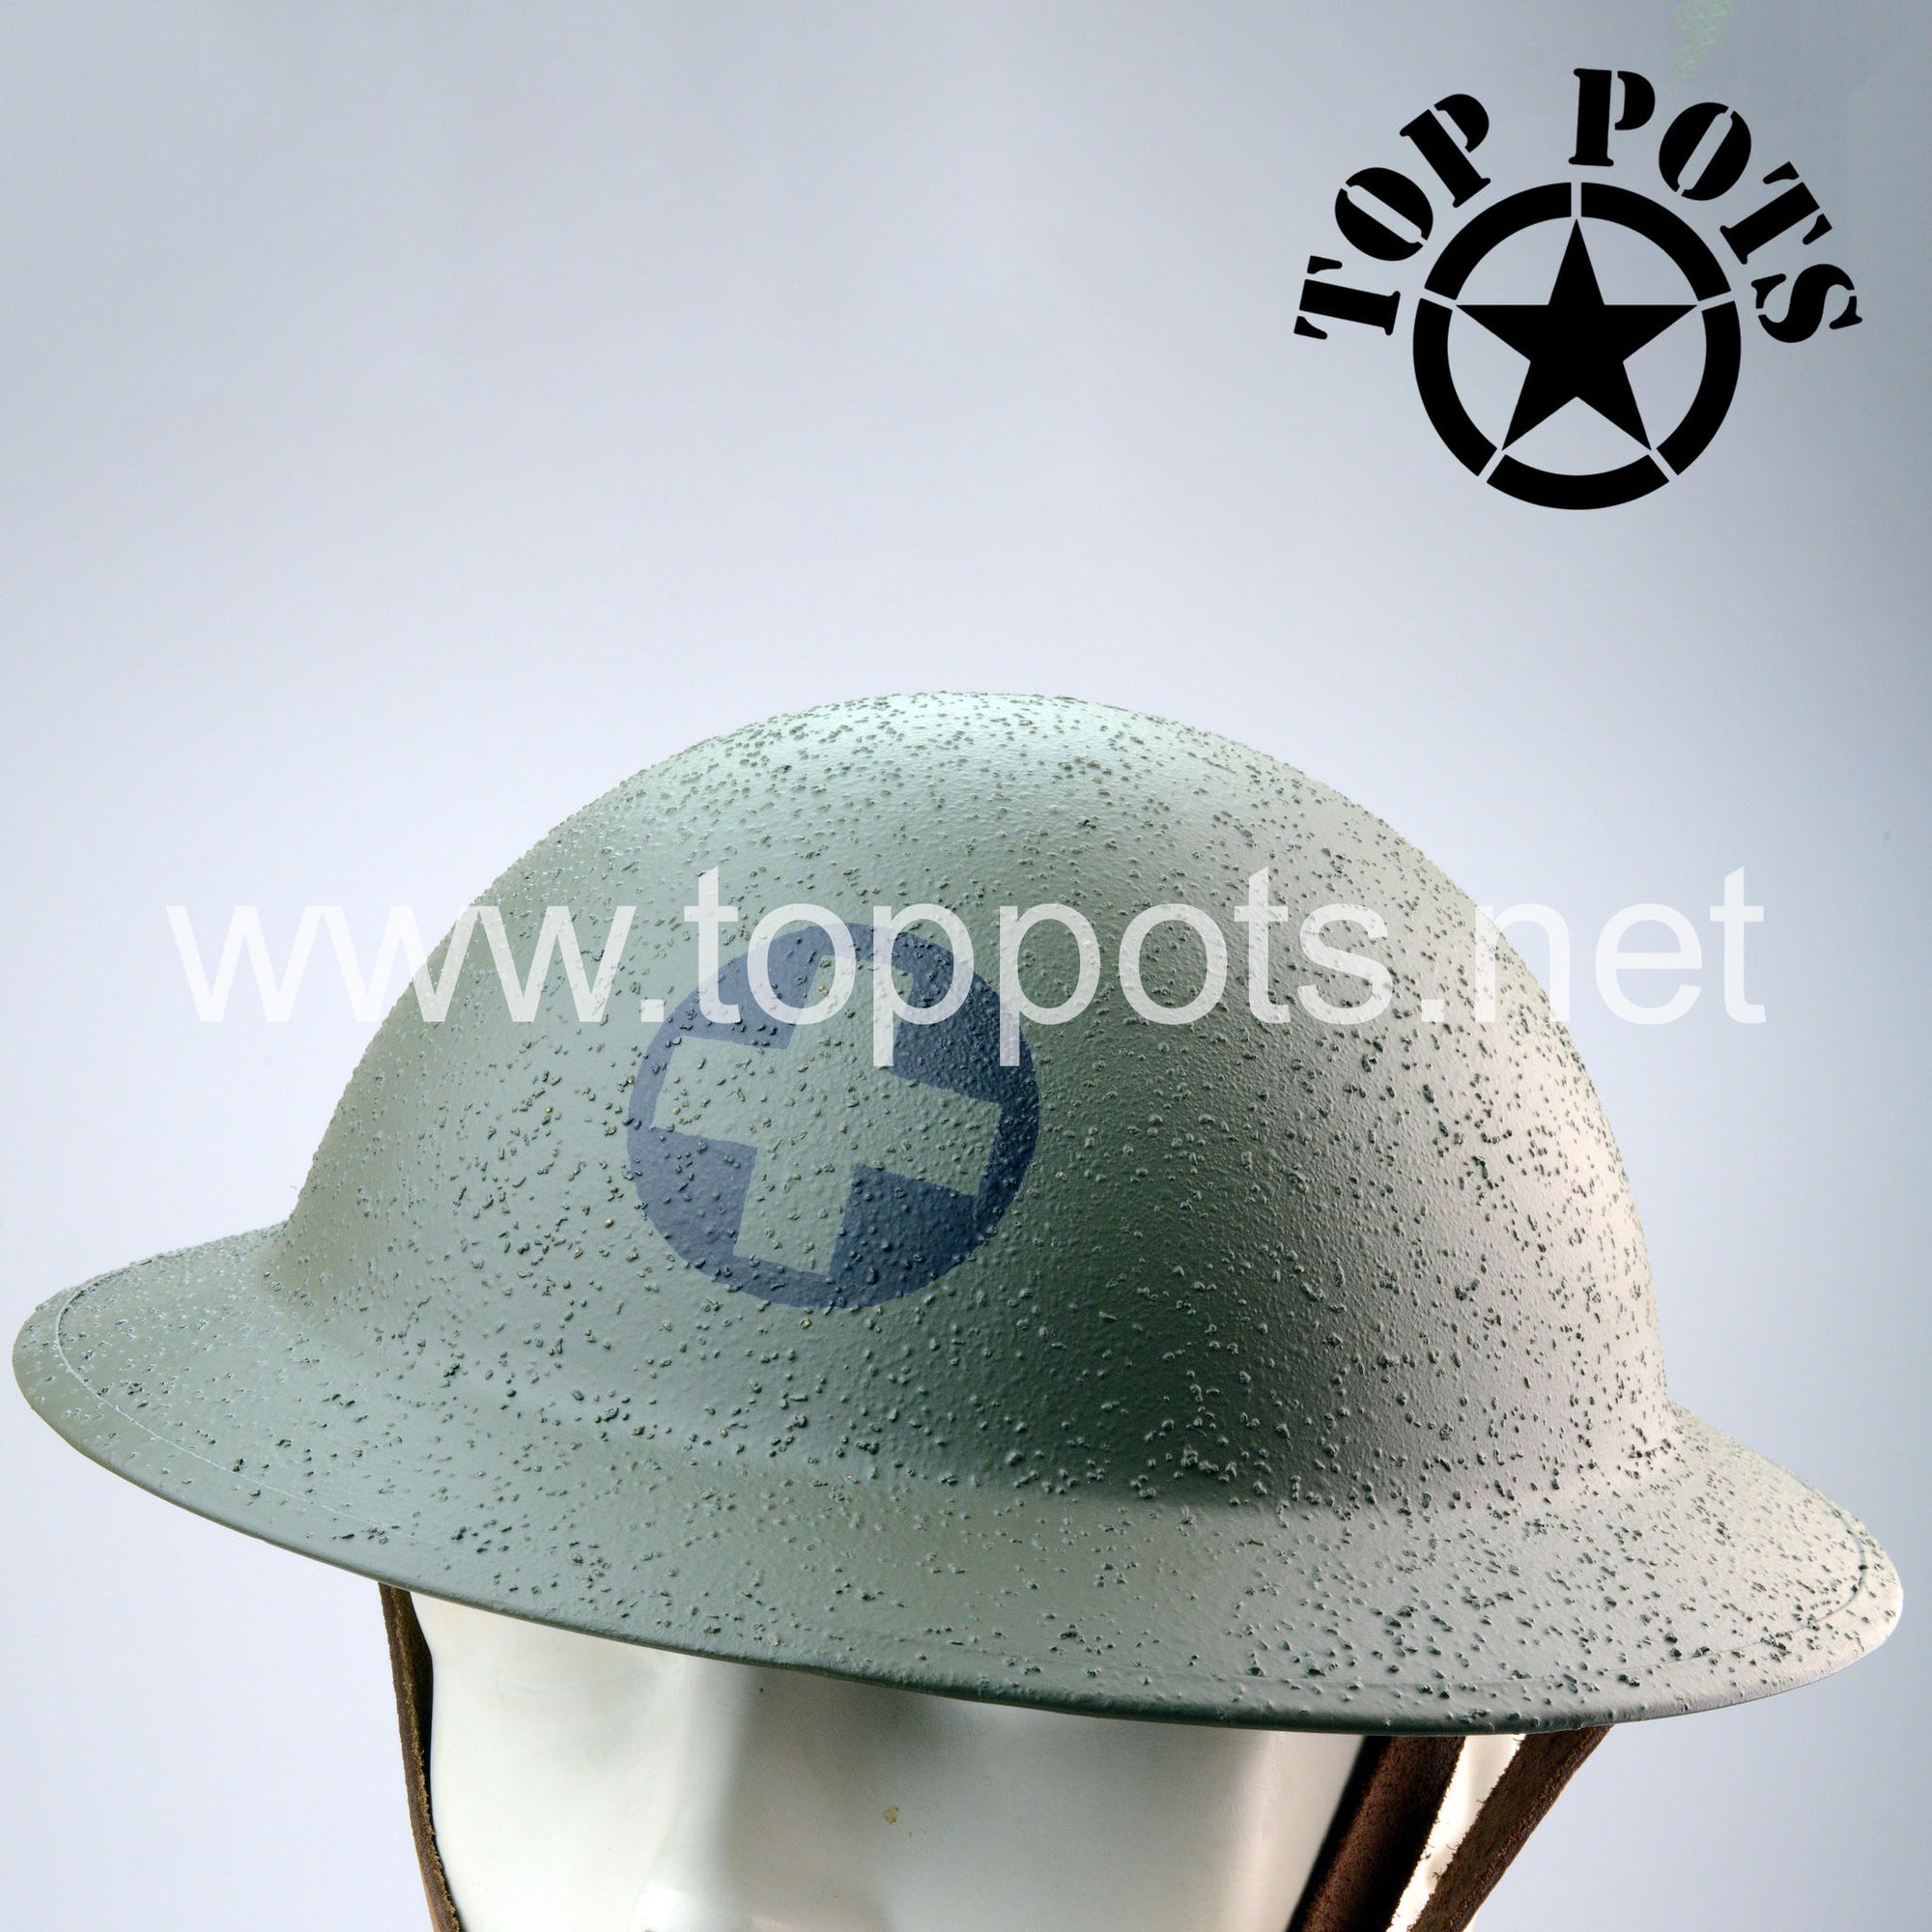 WWI US Army Reproduction American Doughboy M1917 Enlisted Brodie Helmet and Liner with subdued 33rd Infantry Division Emblem – Textured Finish